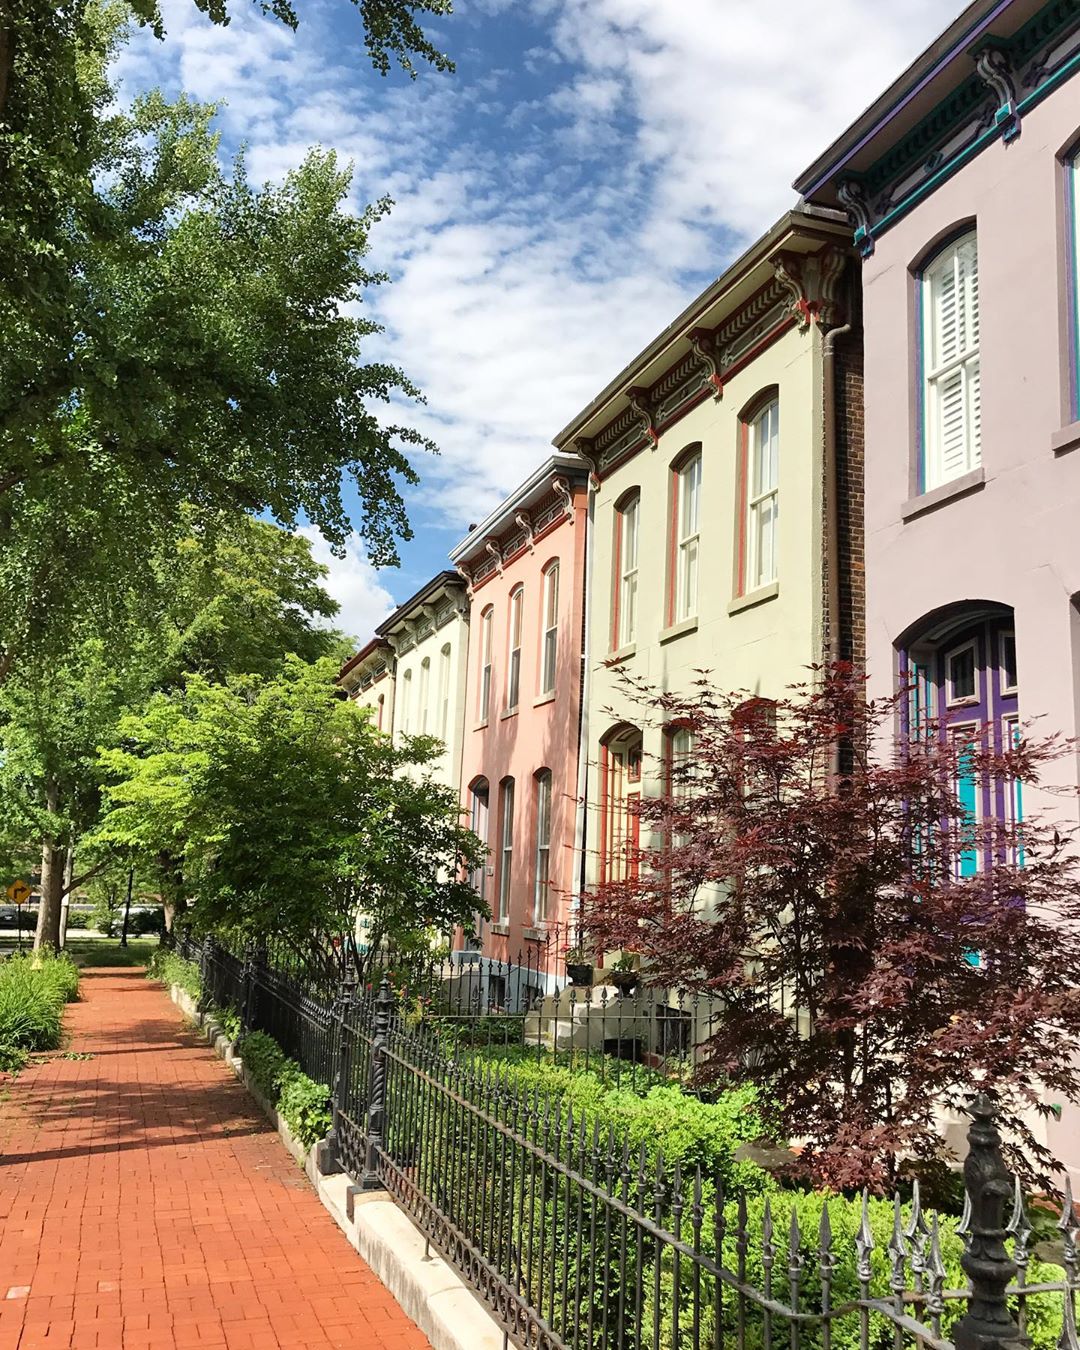 Purple, yellow, and pink rowhouses on a sunny day in Lafayette Square, St. Louis. Photo by Instagram user @yourcoachmeg